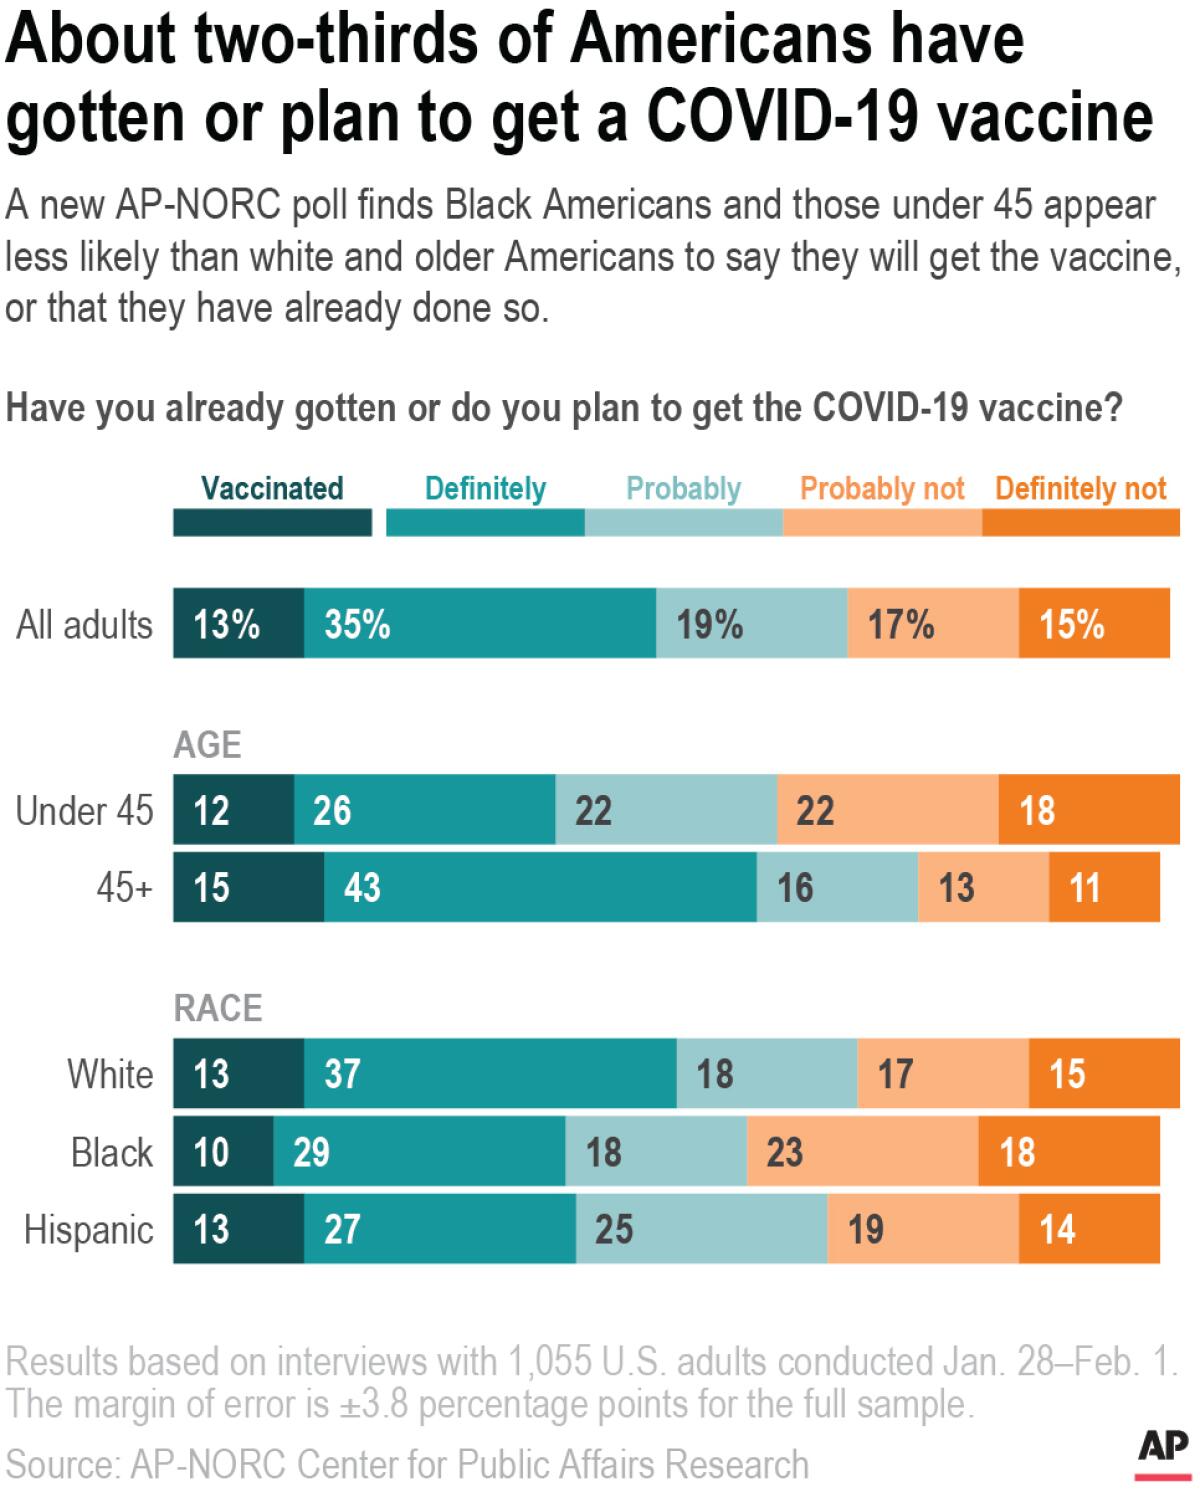 A chart with results of a new AP-NORC poll about COVID-19 vaccines